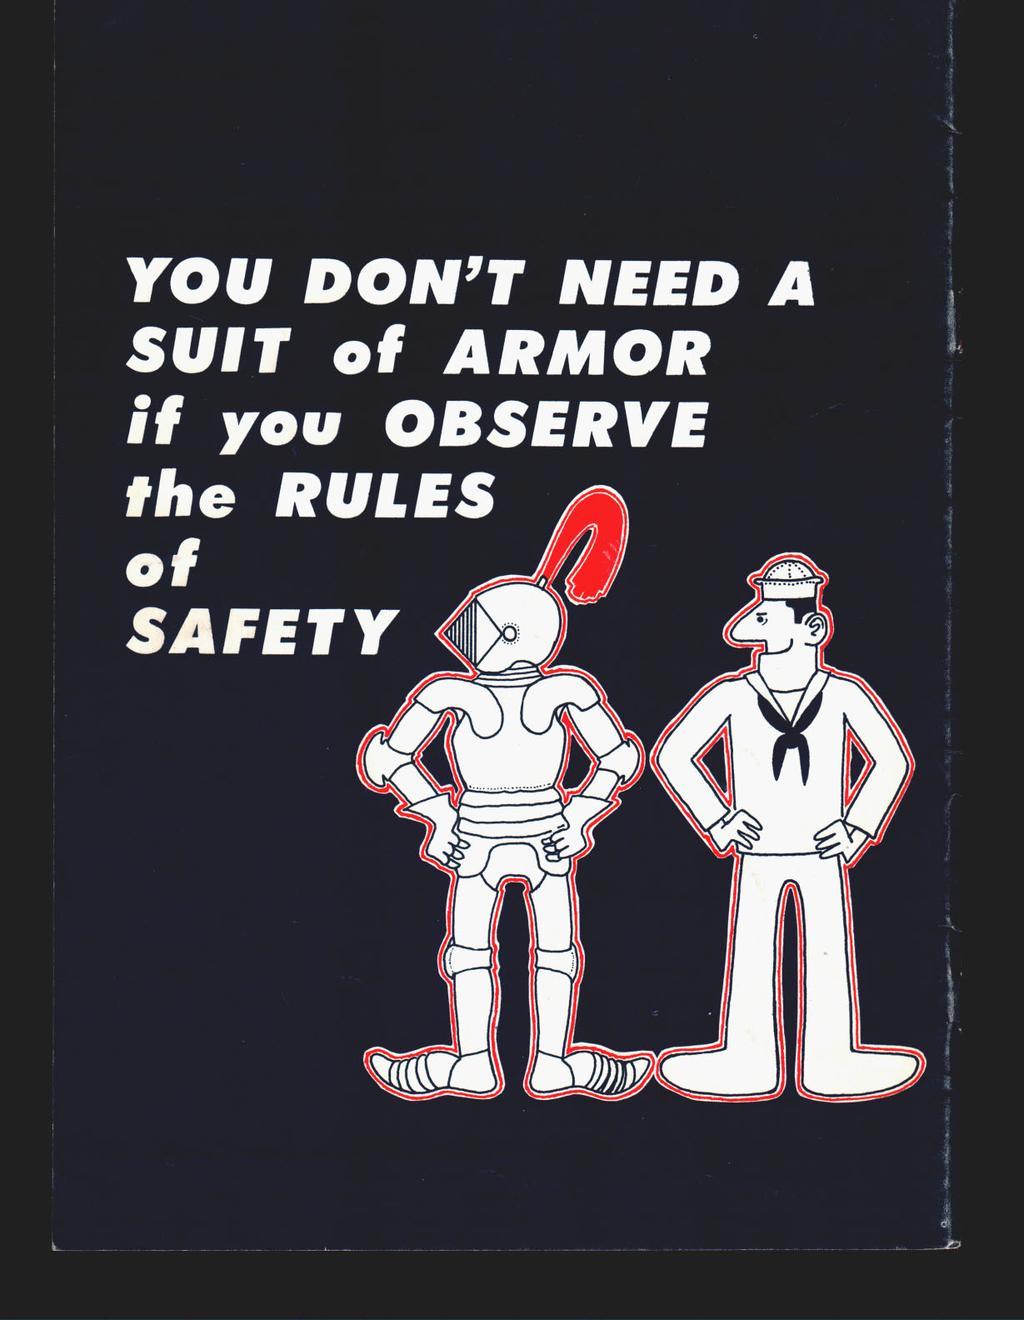 YOU DON'T NEED A SUIT of ARMOR if